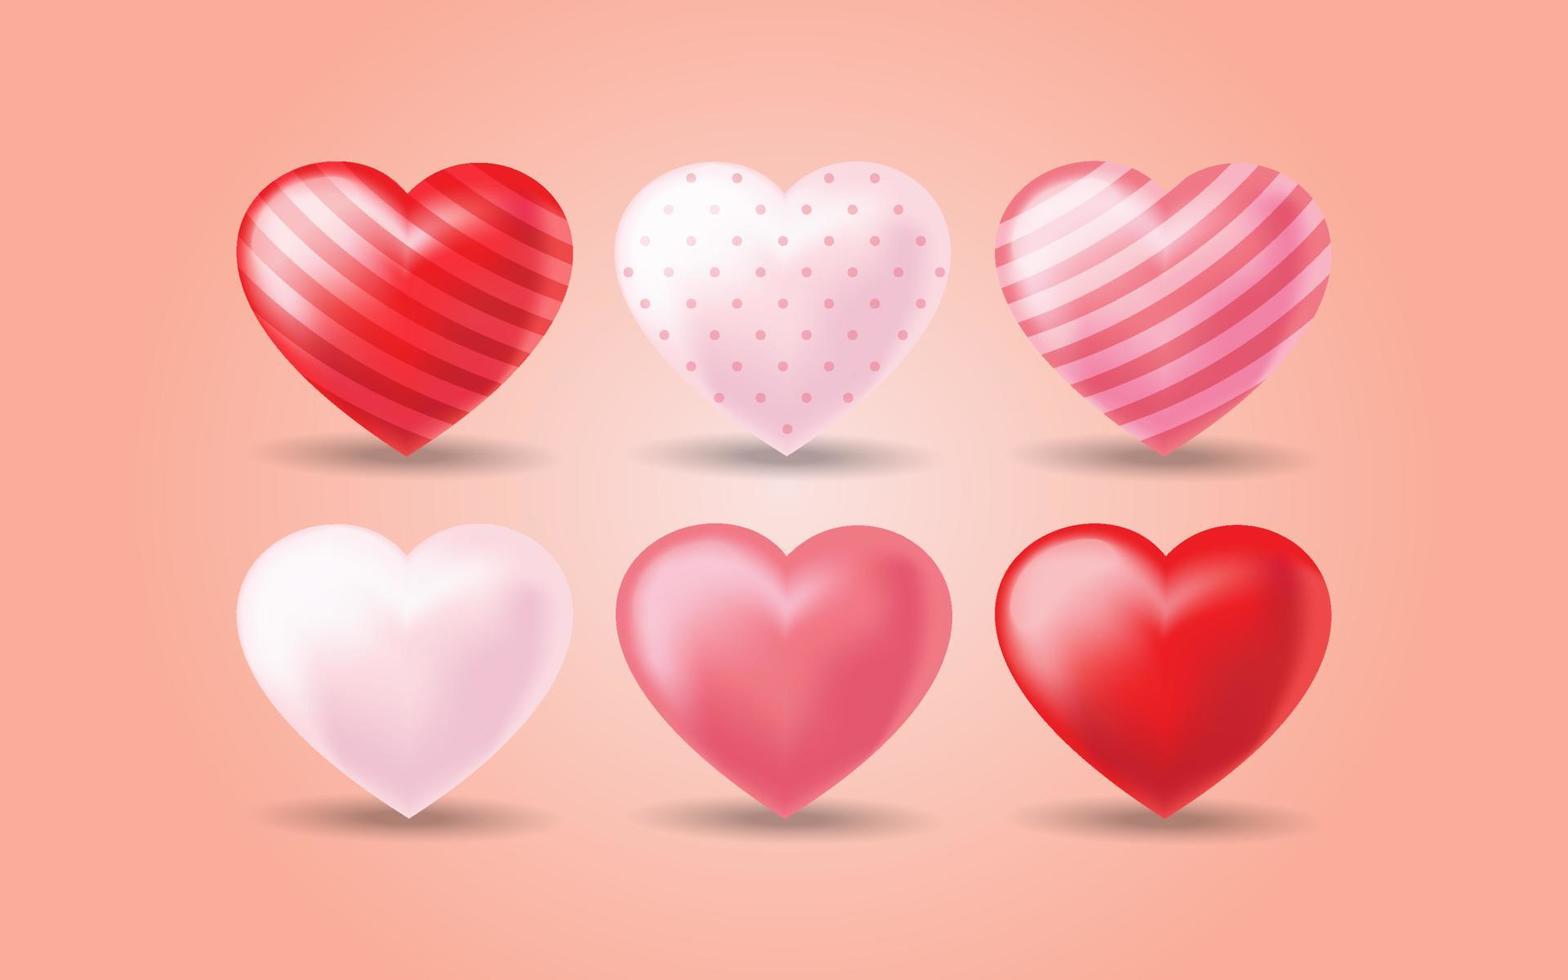 Set of Pink and Red 3d Hearts Illustration vector